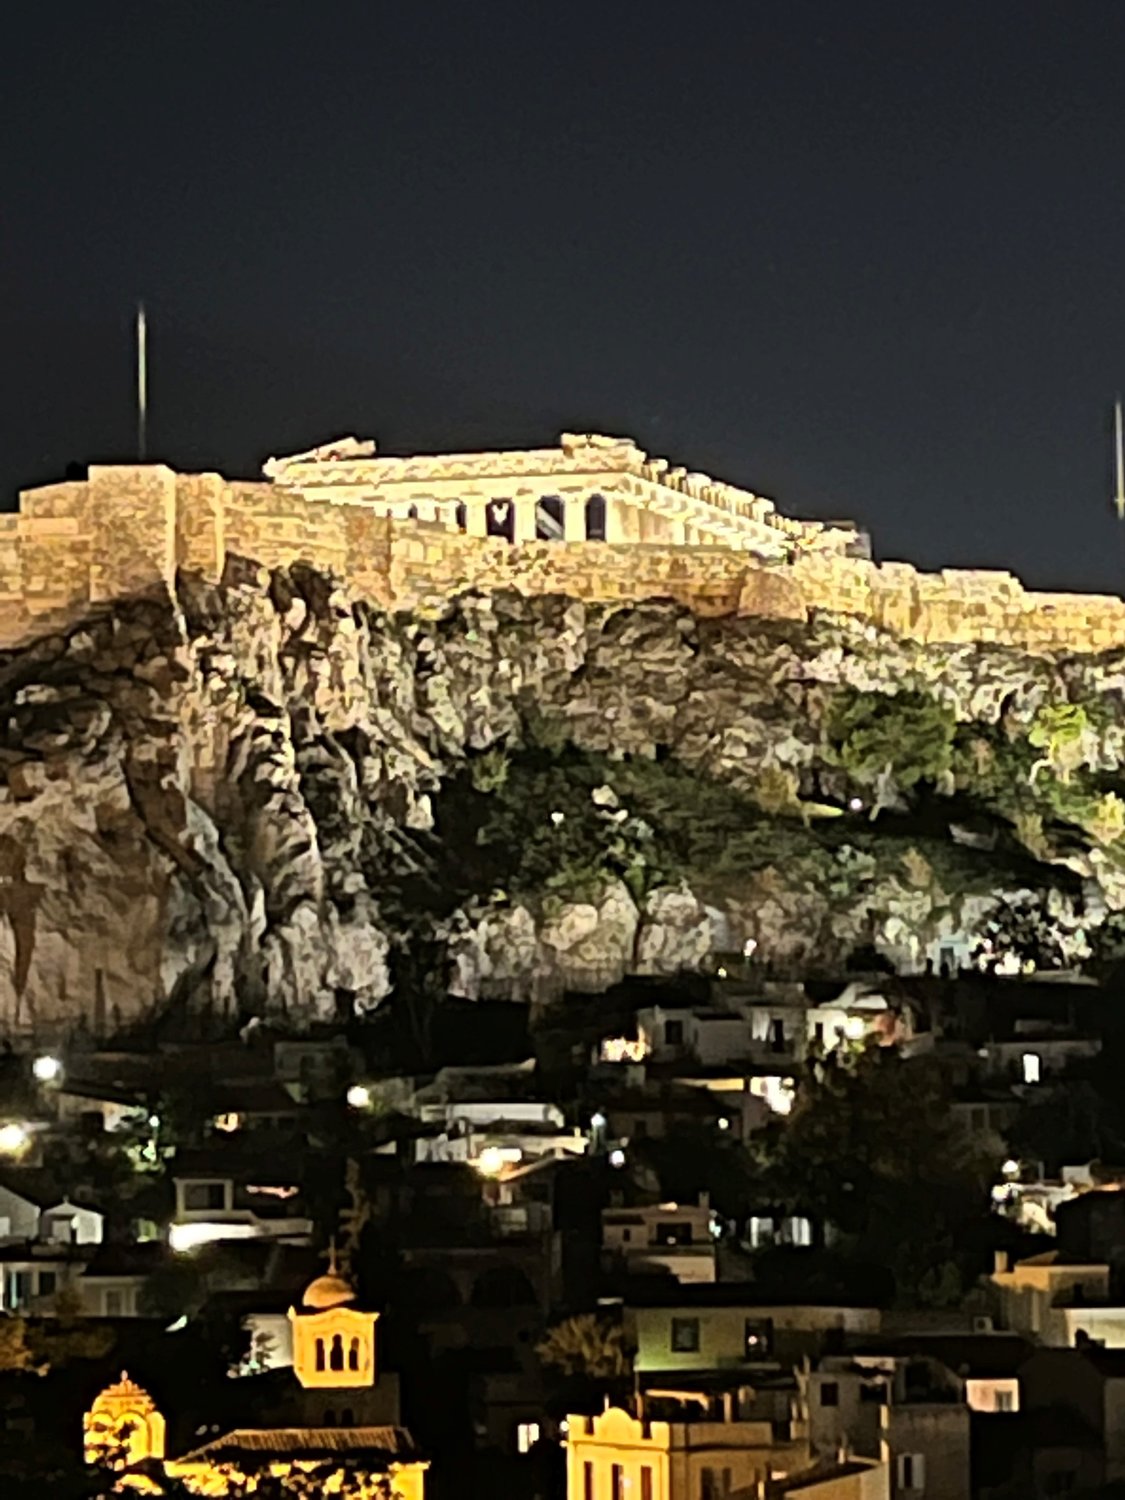 A nighttime view of the Acropolis.